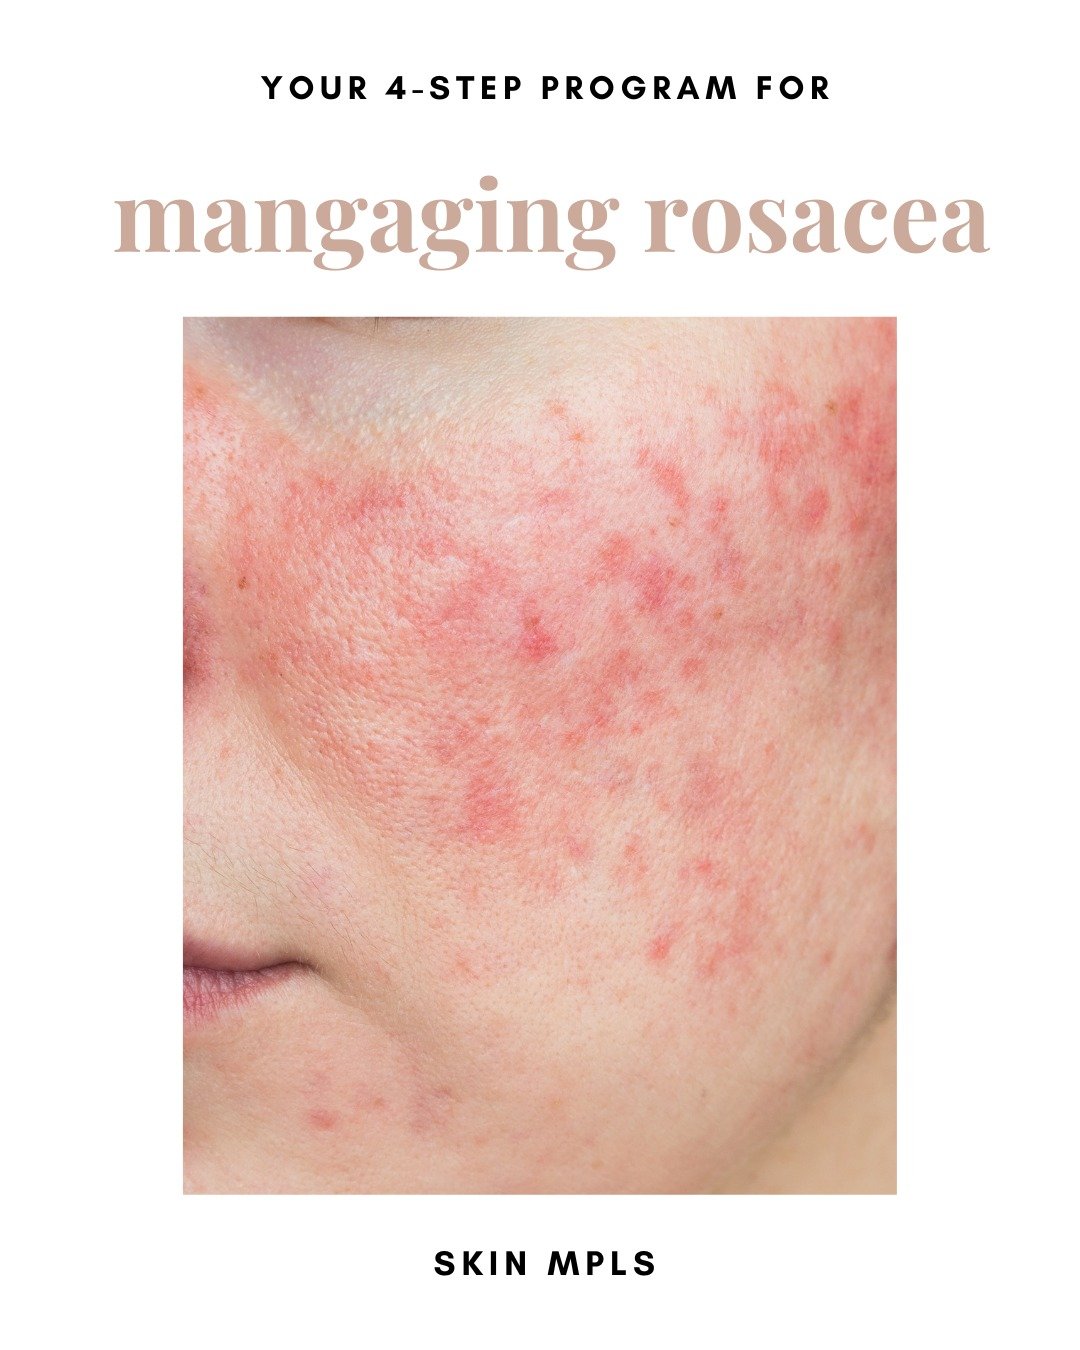 Our number one goal at #SKINMPLS is to help everyone feel confident in their skin, especially when it comes to dealing with rosacea! 

Like acne, rosacea has no cure but adopting a treatment plan and a targeted skincare regimen can help your symptoms